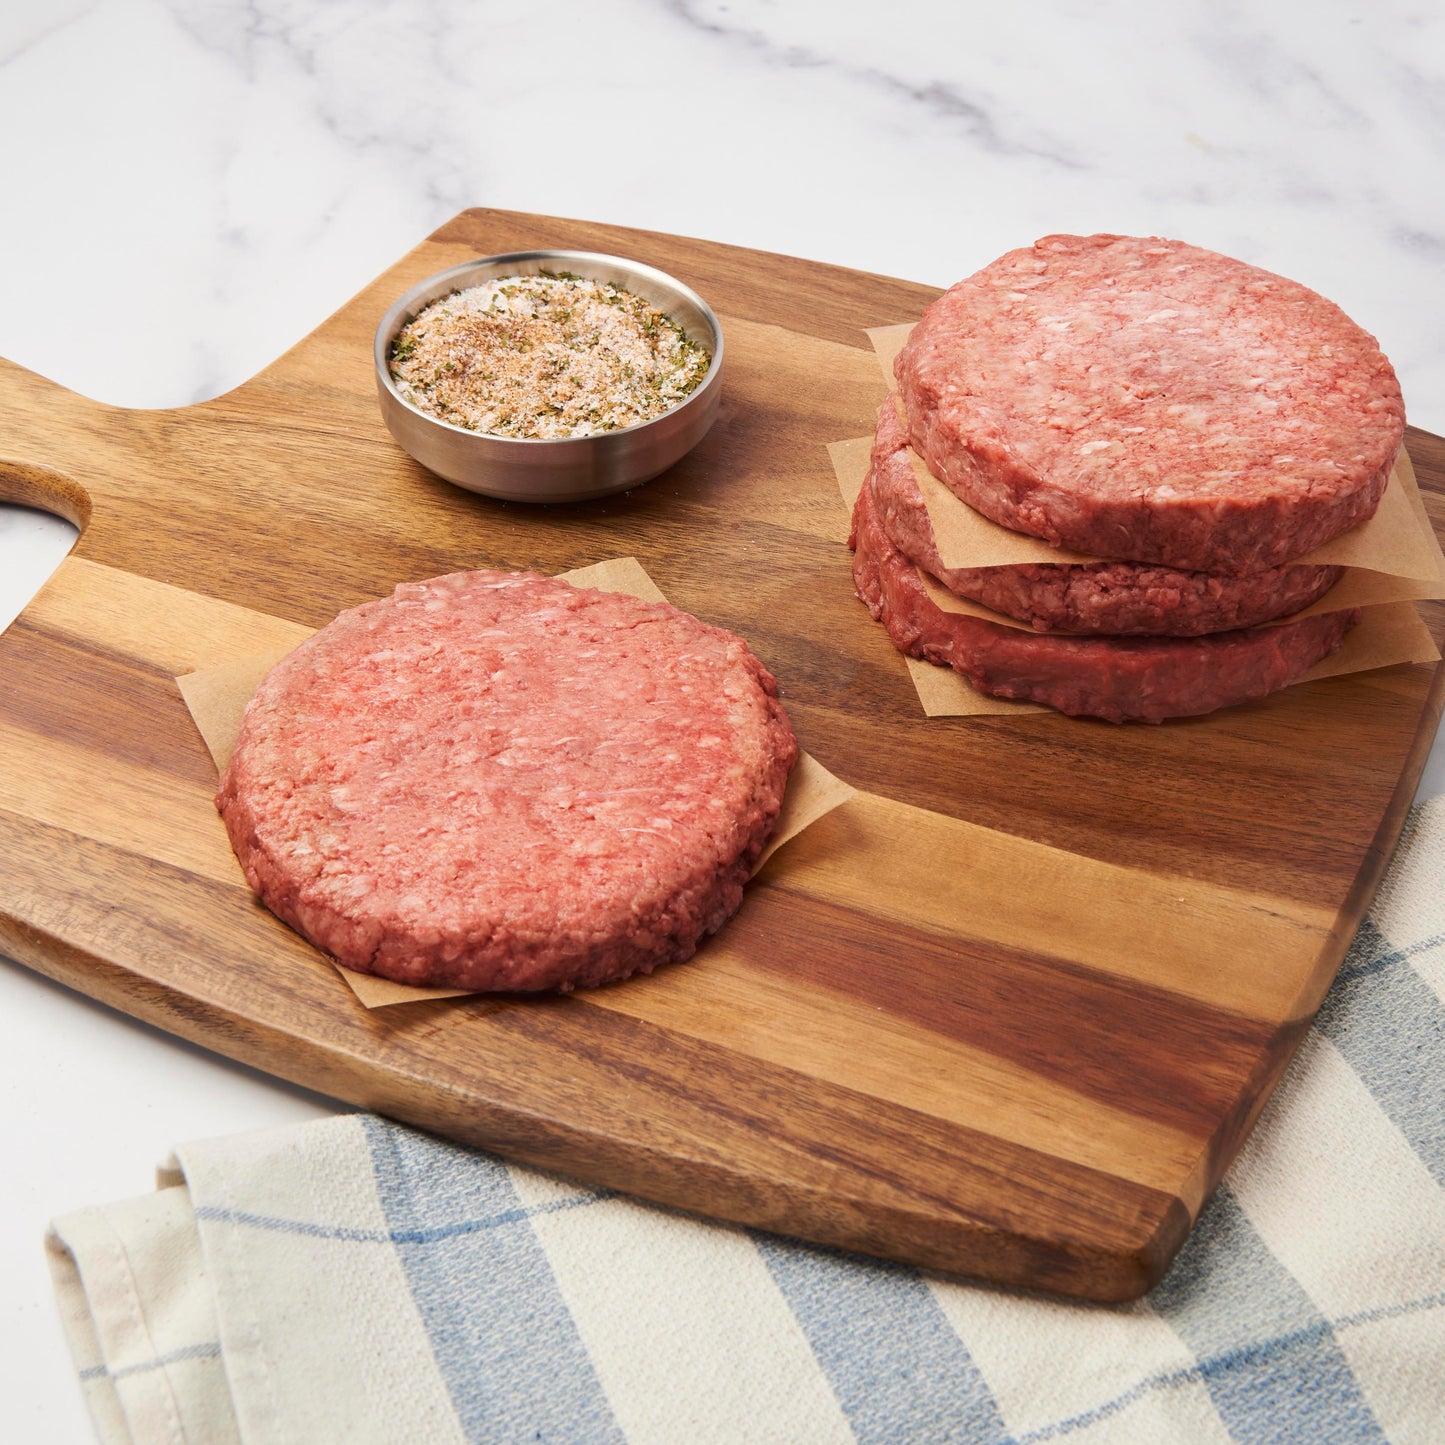 Raw A5 Blend Burgers on cutting board with salt ready to be cooked